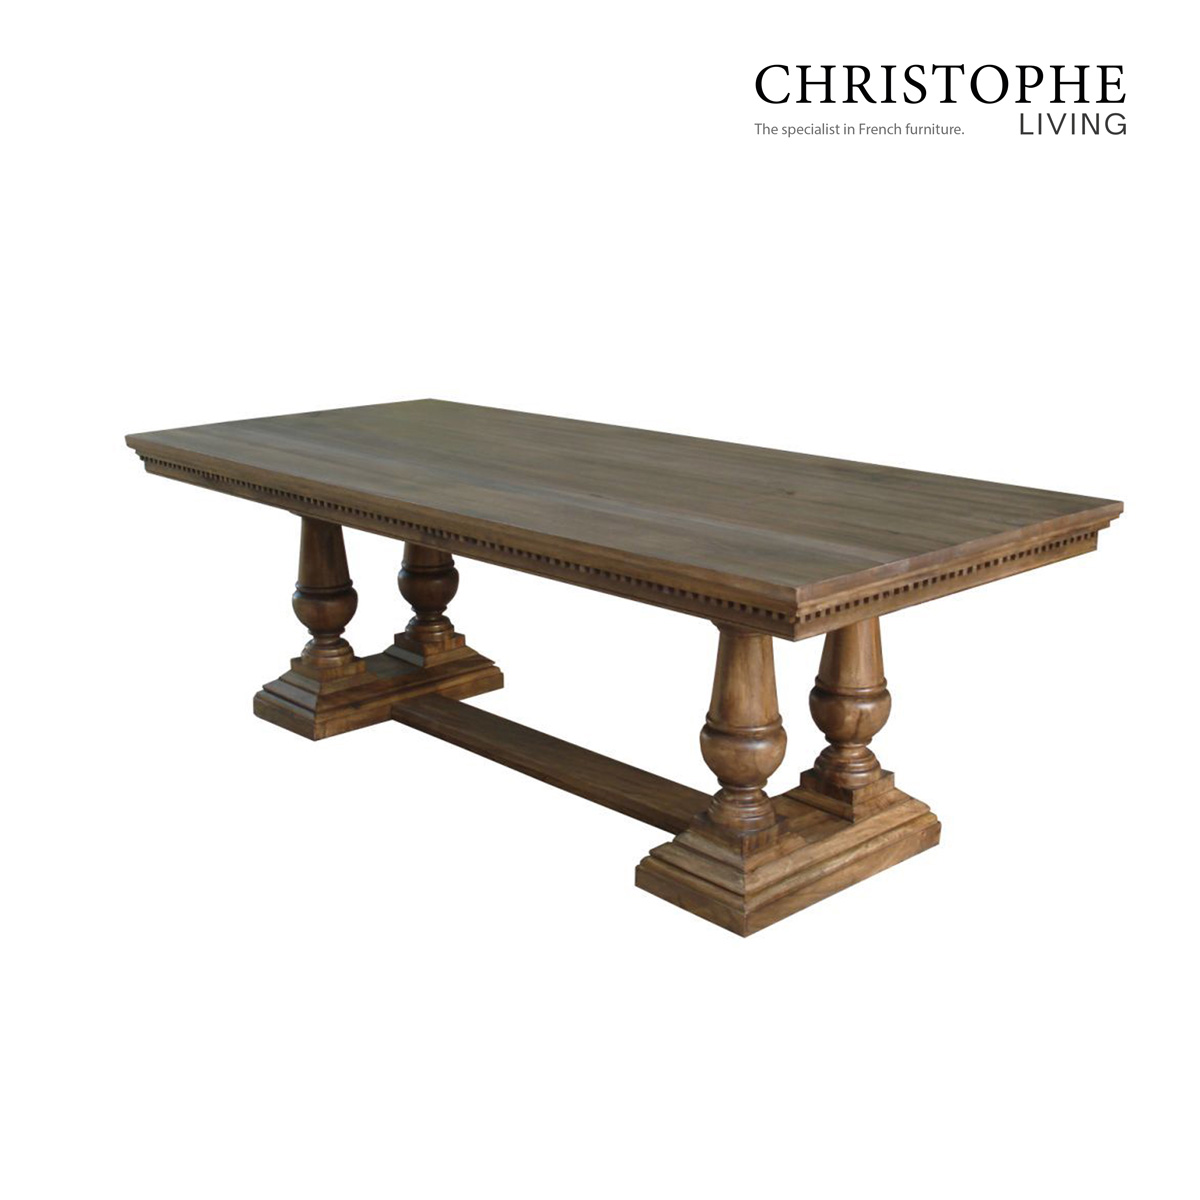 Valentino French Provincial Dining Room Table - Solid Timber 10-Seater in Rectangular Walnut Grey Finish